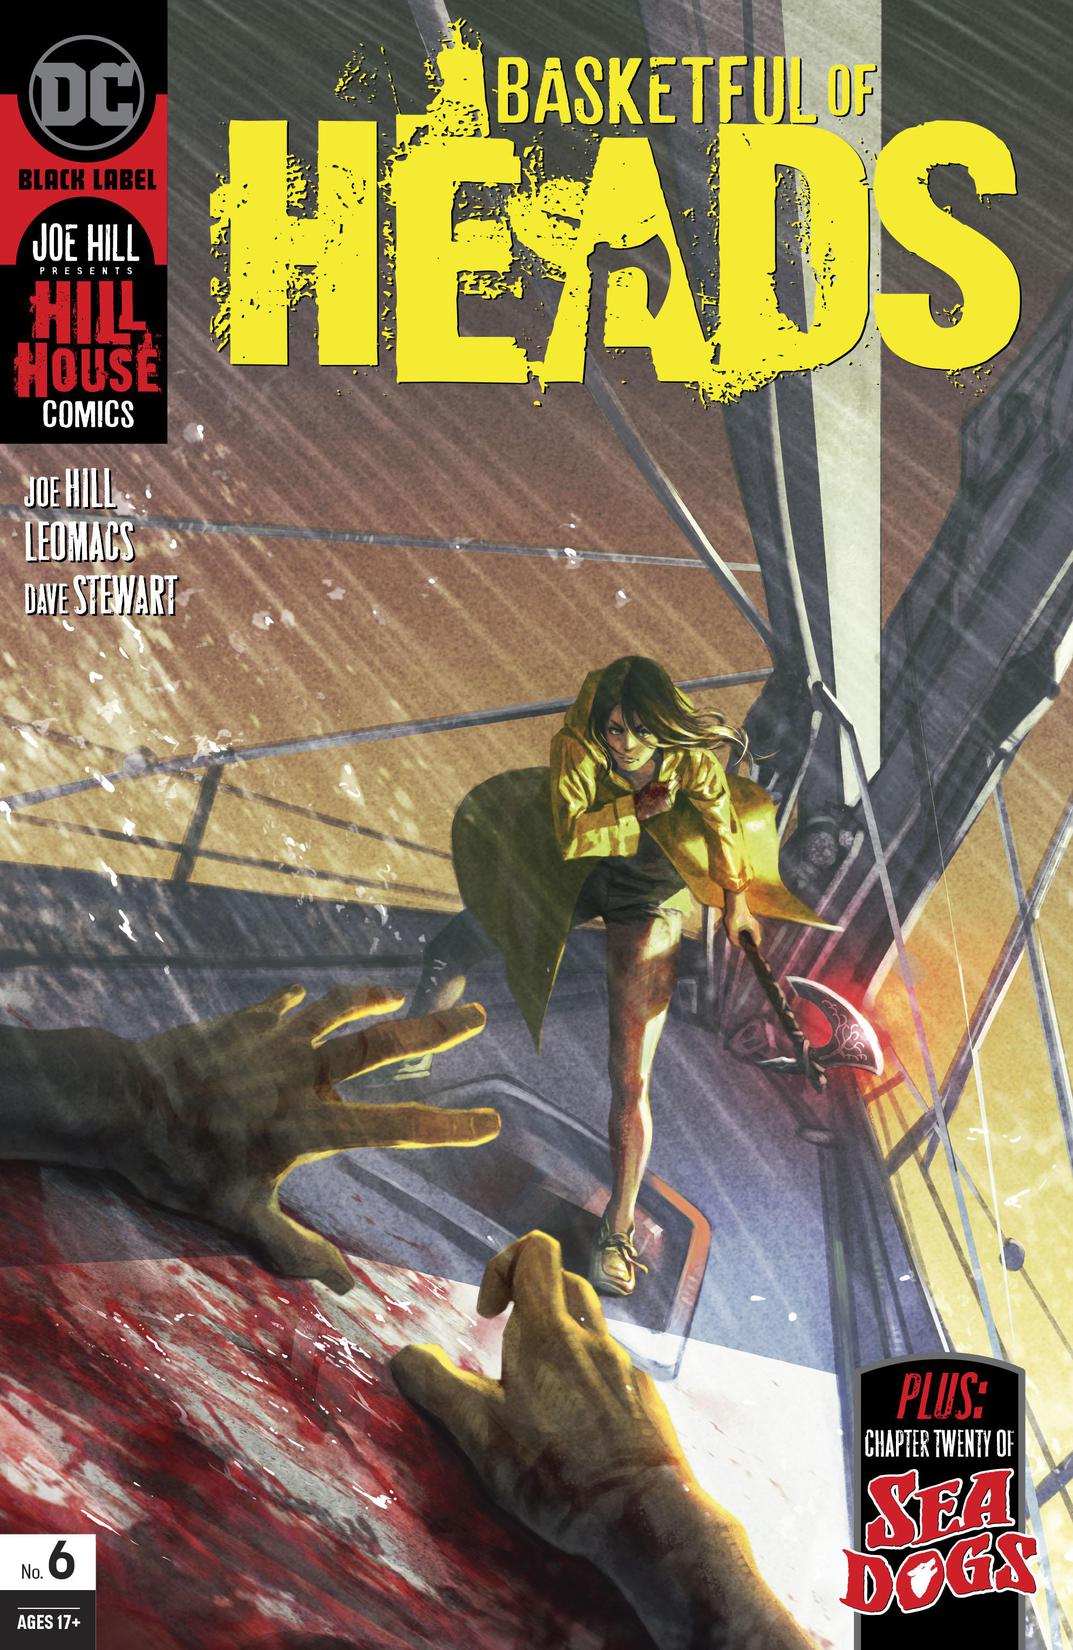 Basketful of Heads #6 preview images